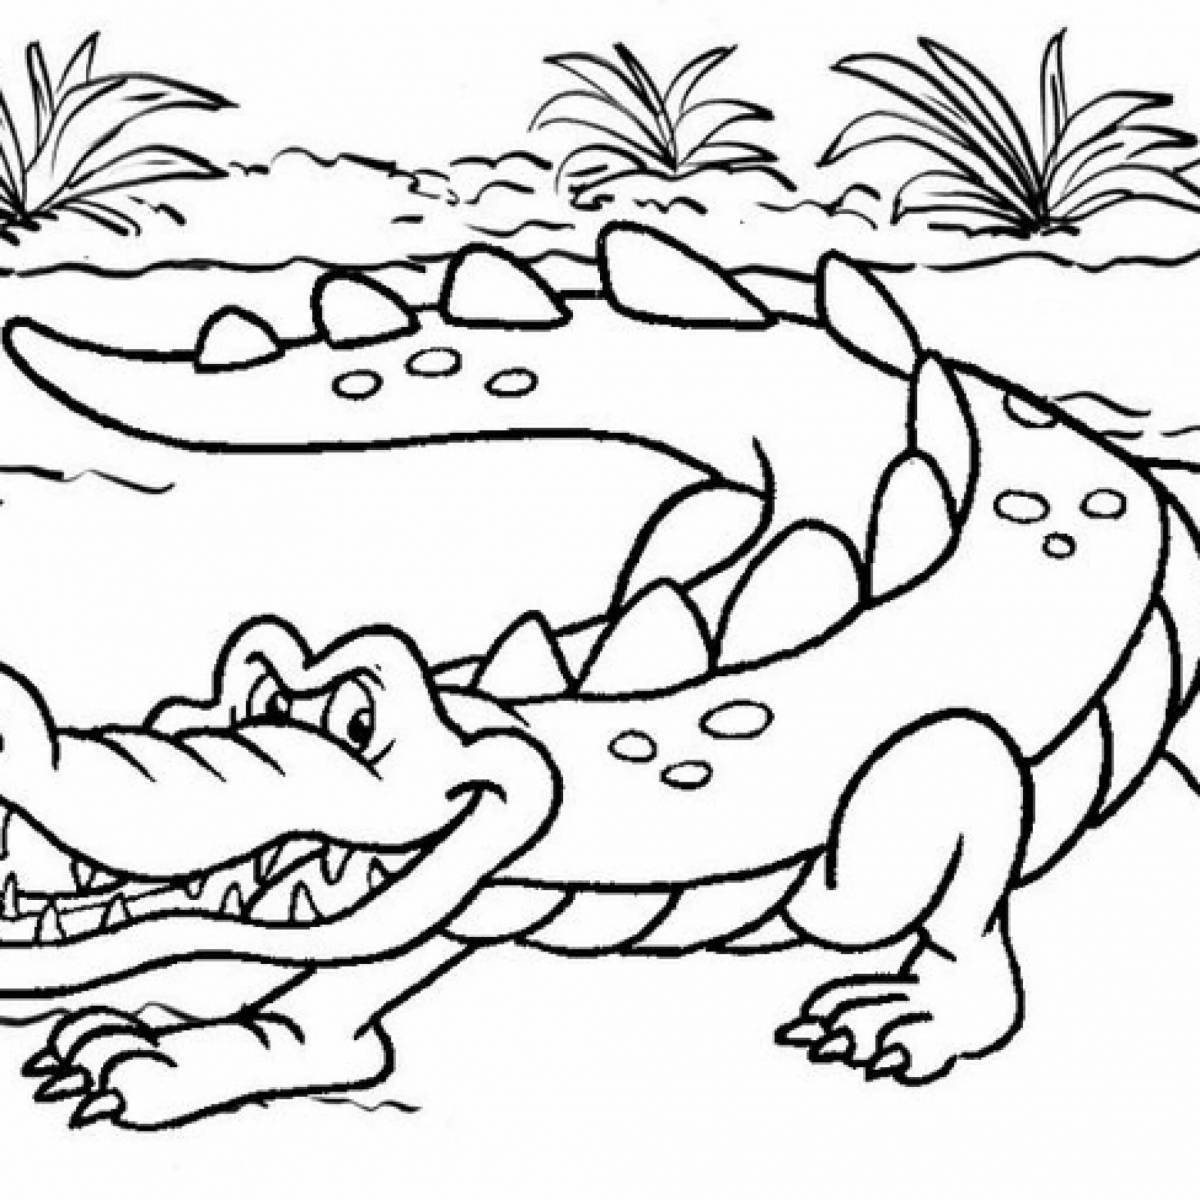 Coloring page freaky crocodile monty